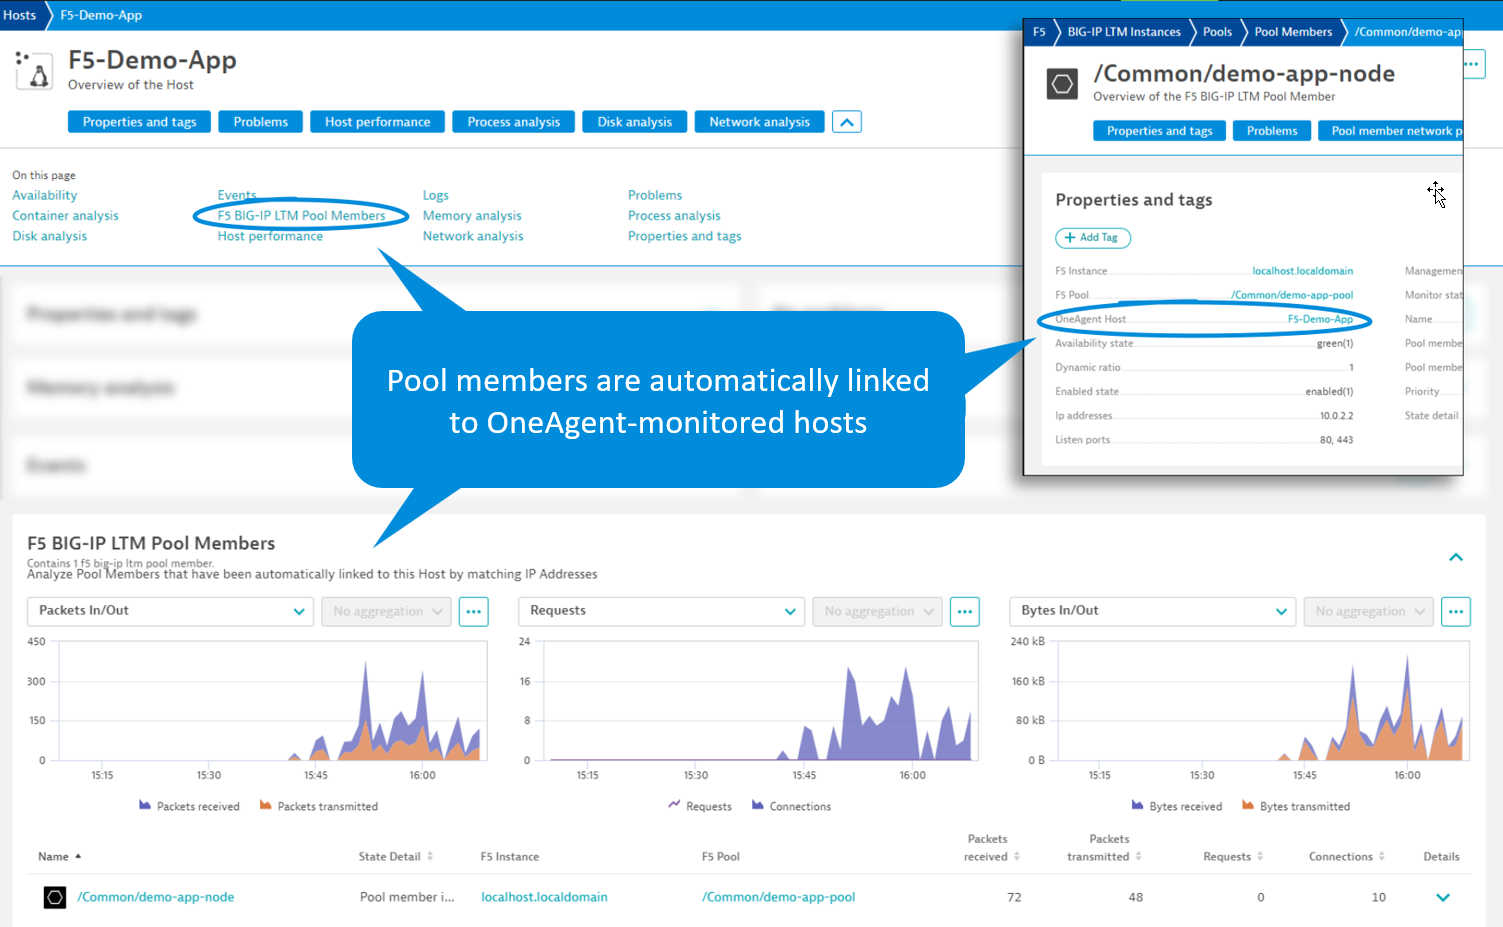 Pool members are automatically linked to OneAgent-monitored hosts. 